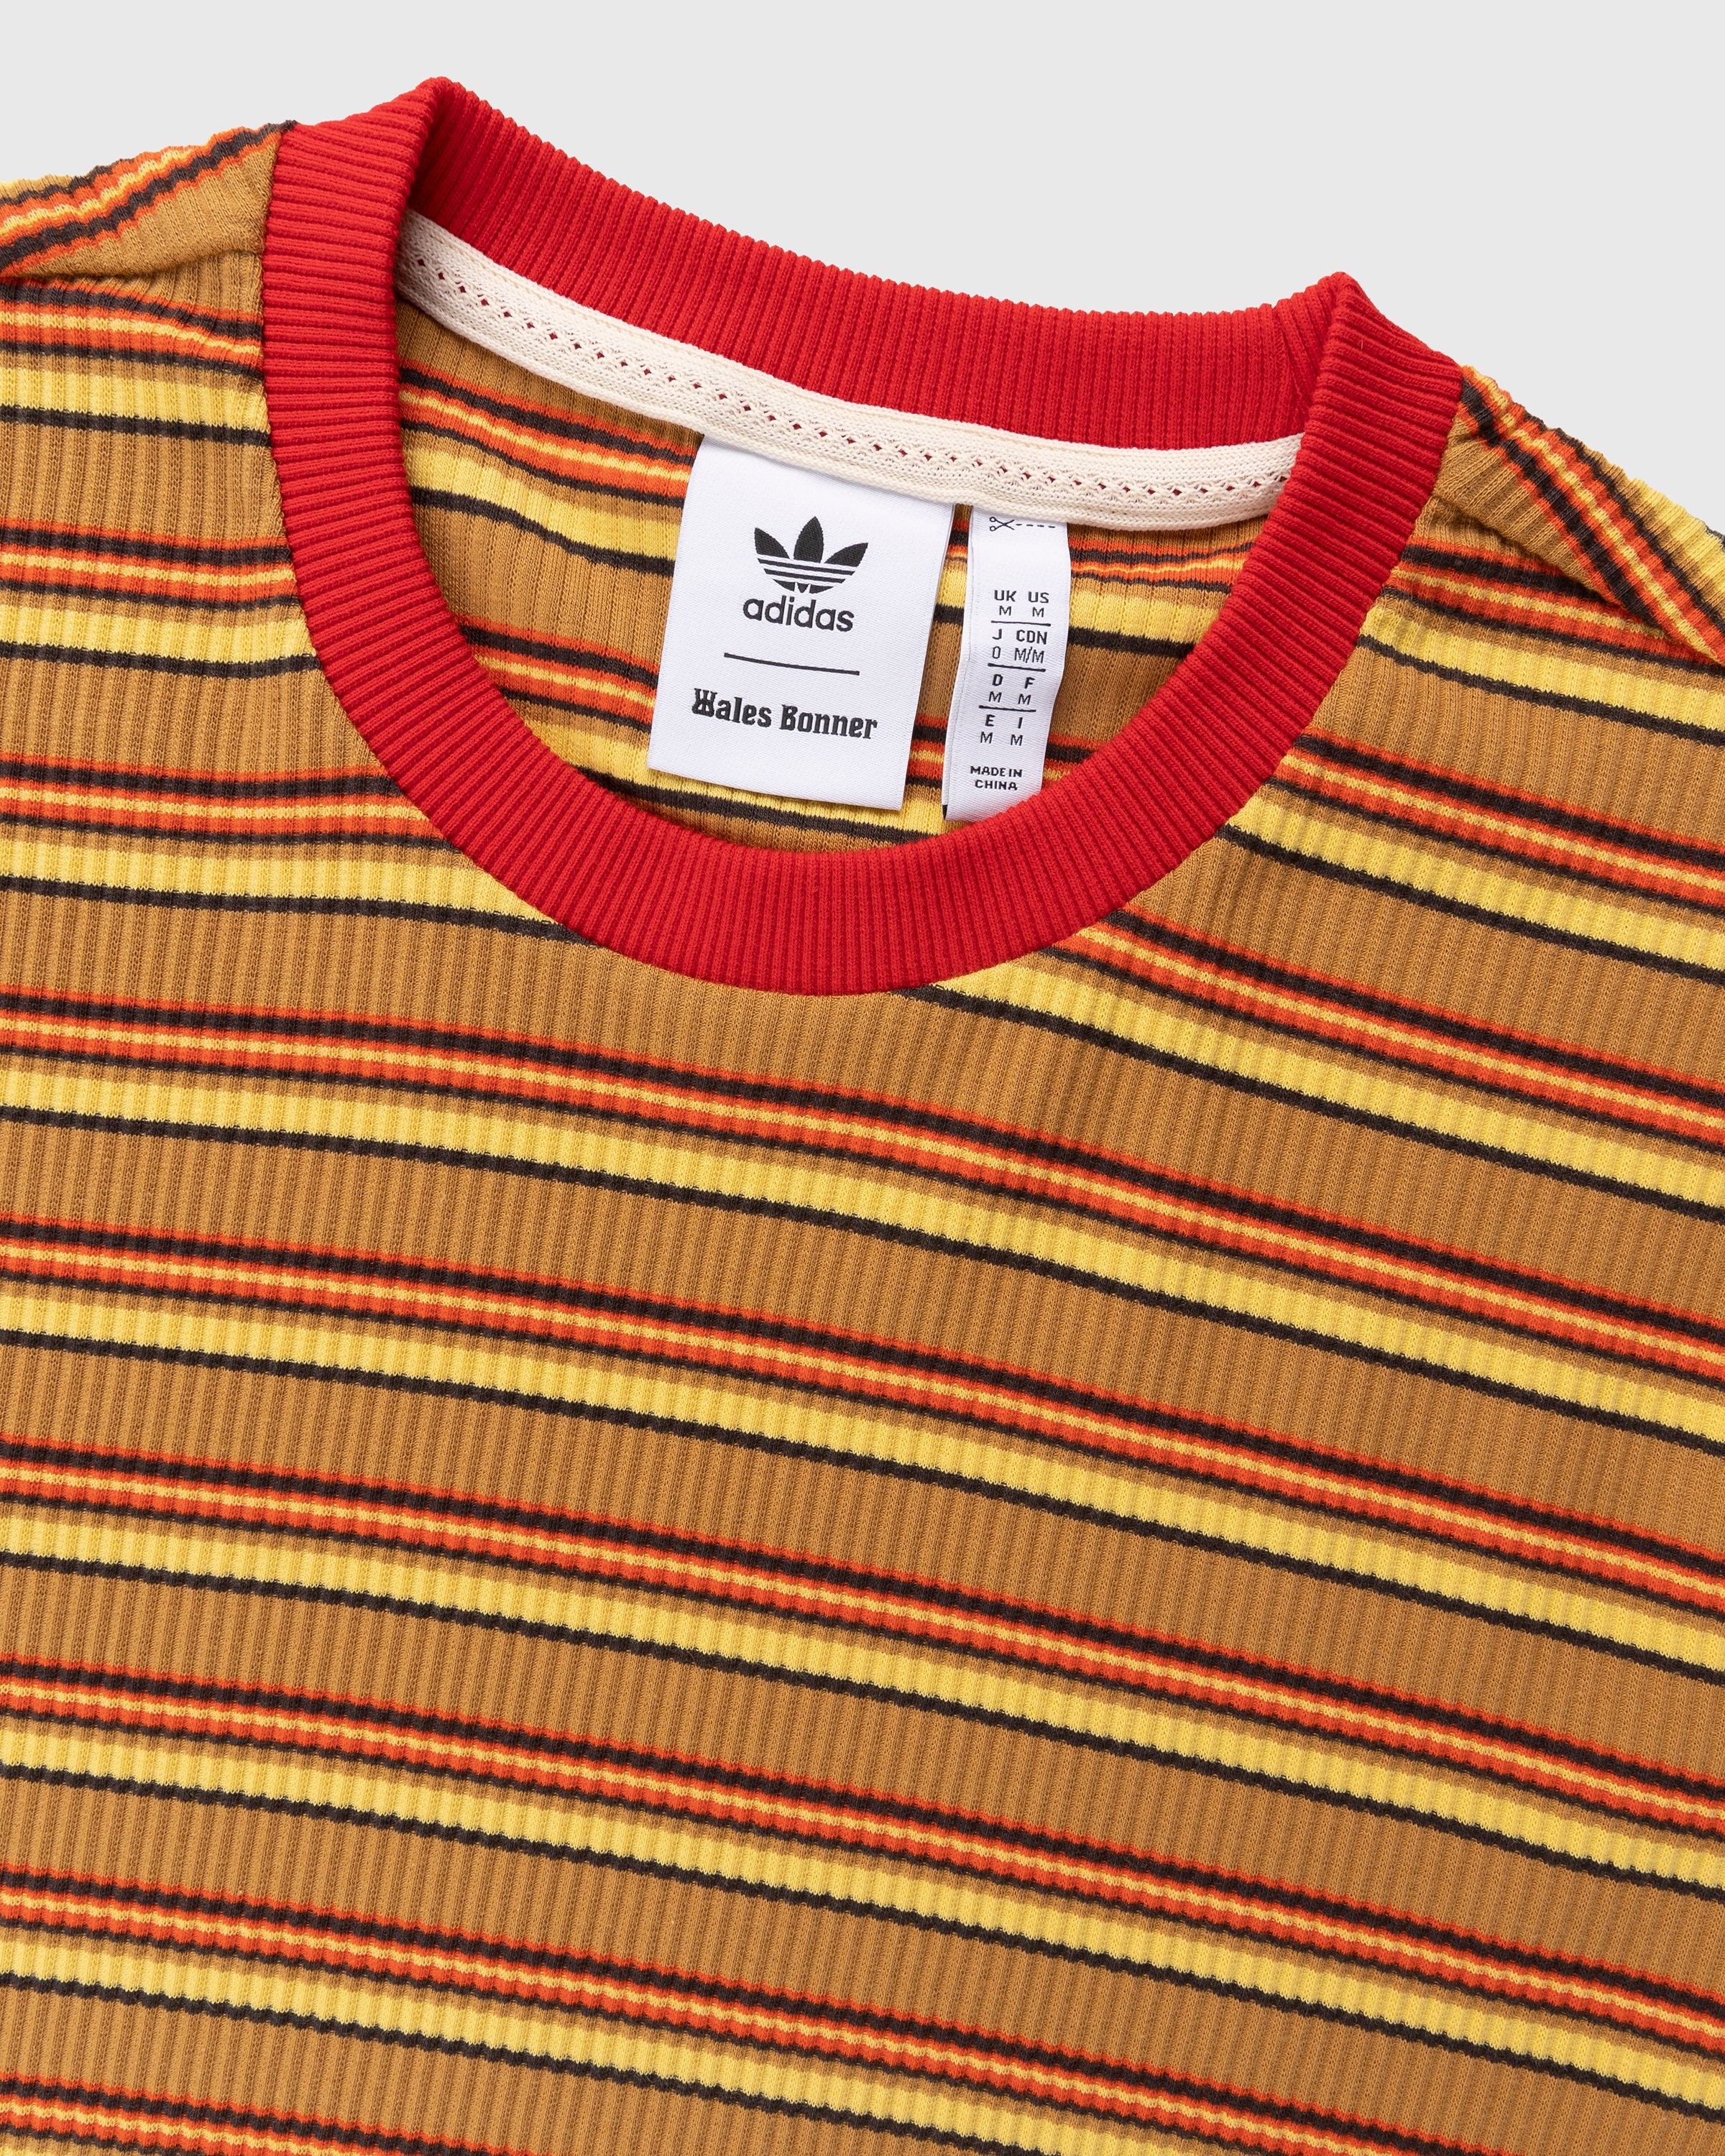 Adidas x Wales Bonner – WB Striped Longsleeve St Fade Gold/Scarlet - Longsleeves - Red - Image 5